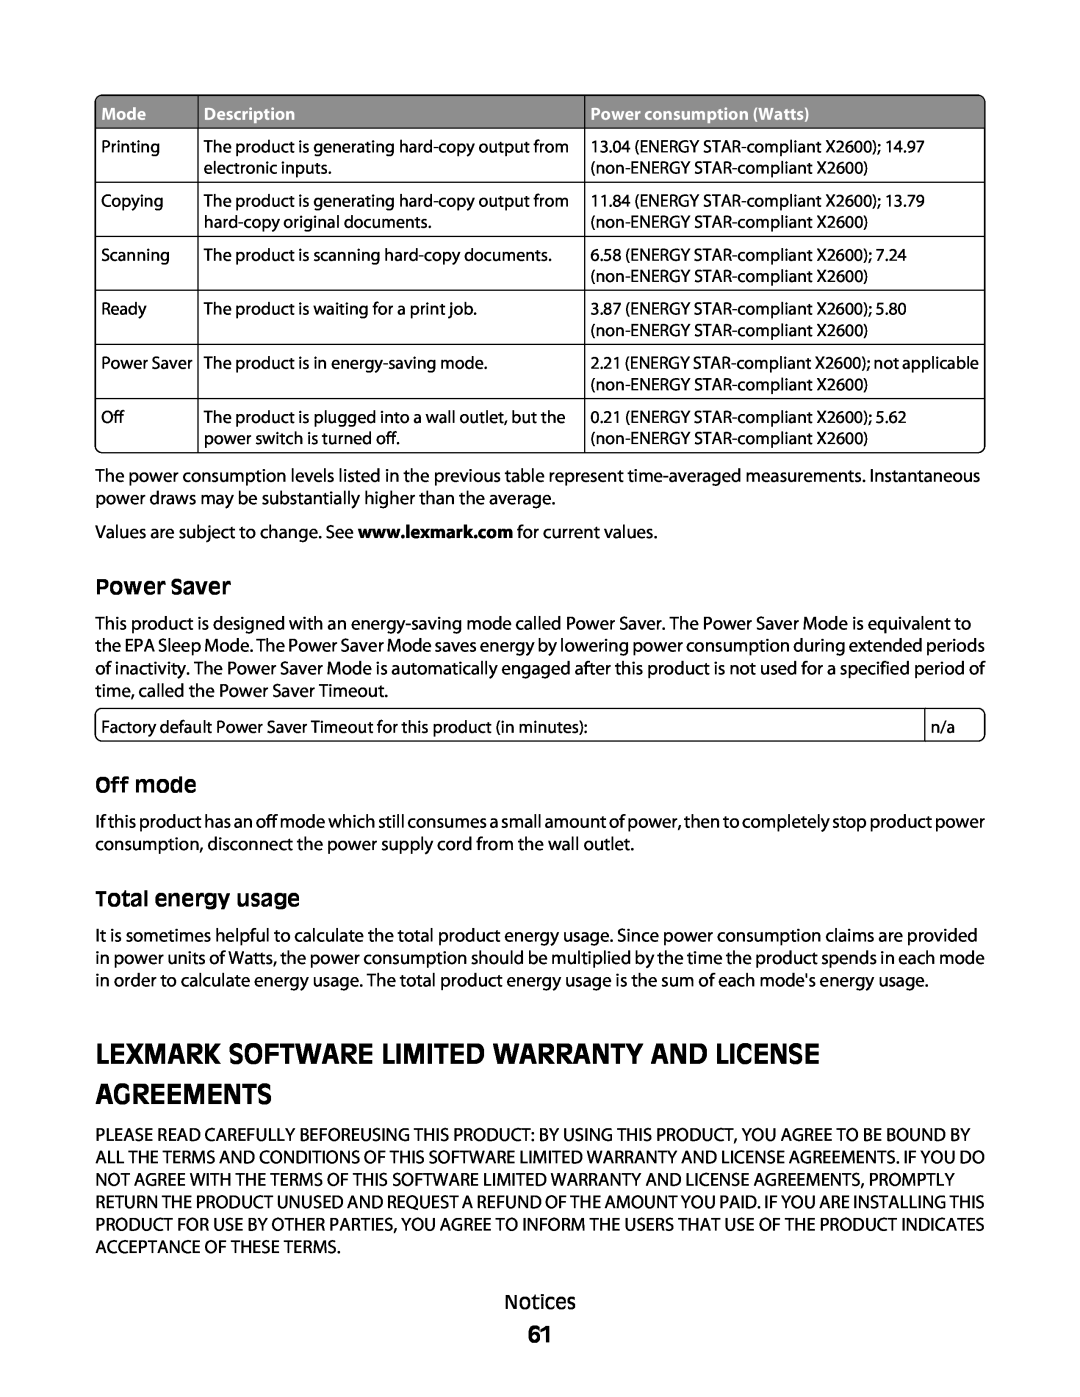 Lexmark 4445, 4433 Lexmark Software Limited Warranty And License Agreements, Power Saver, Off mode, Total energy usage 